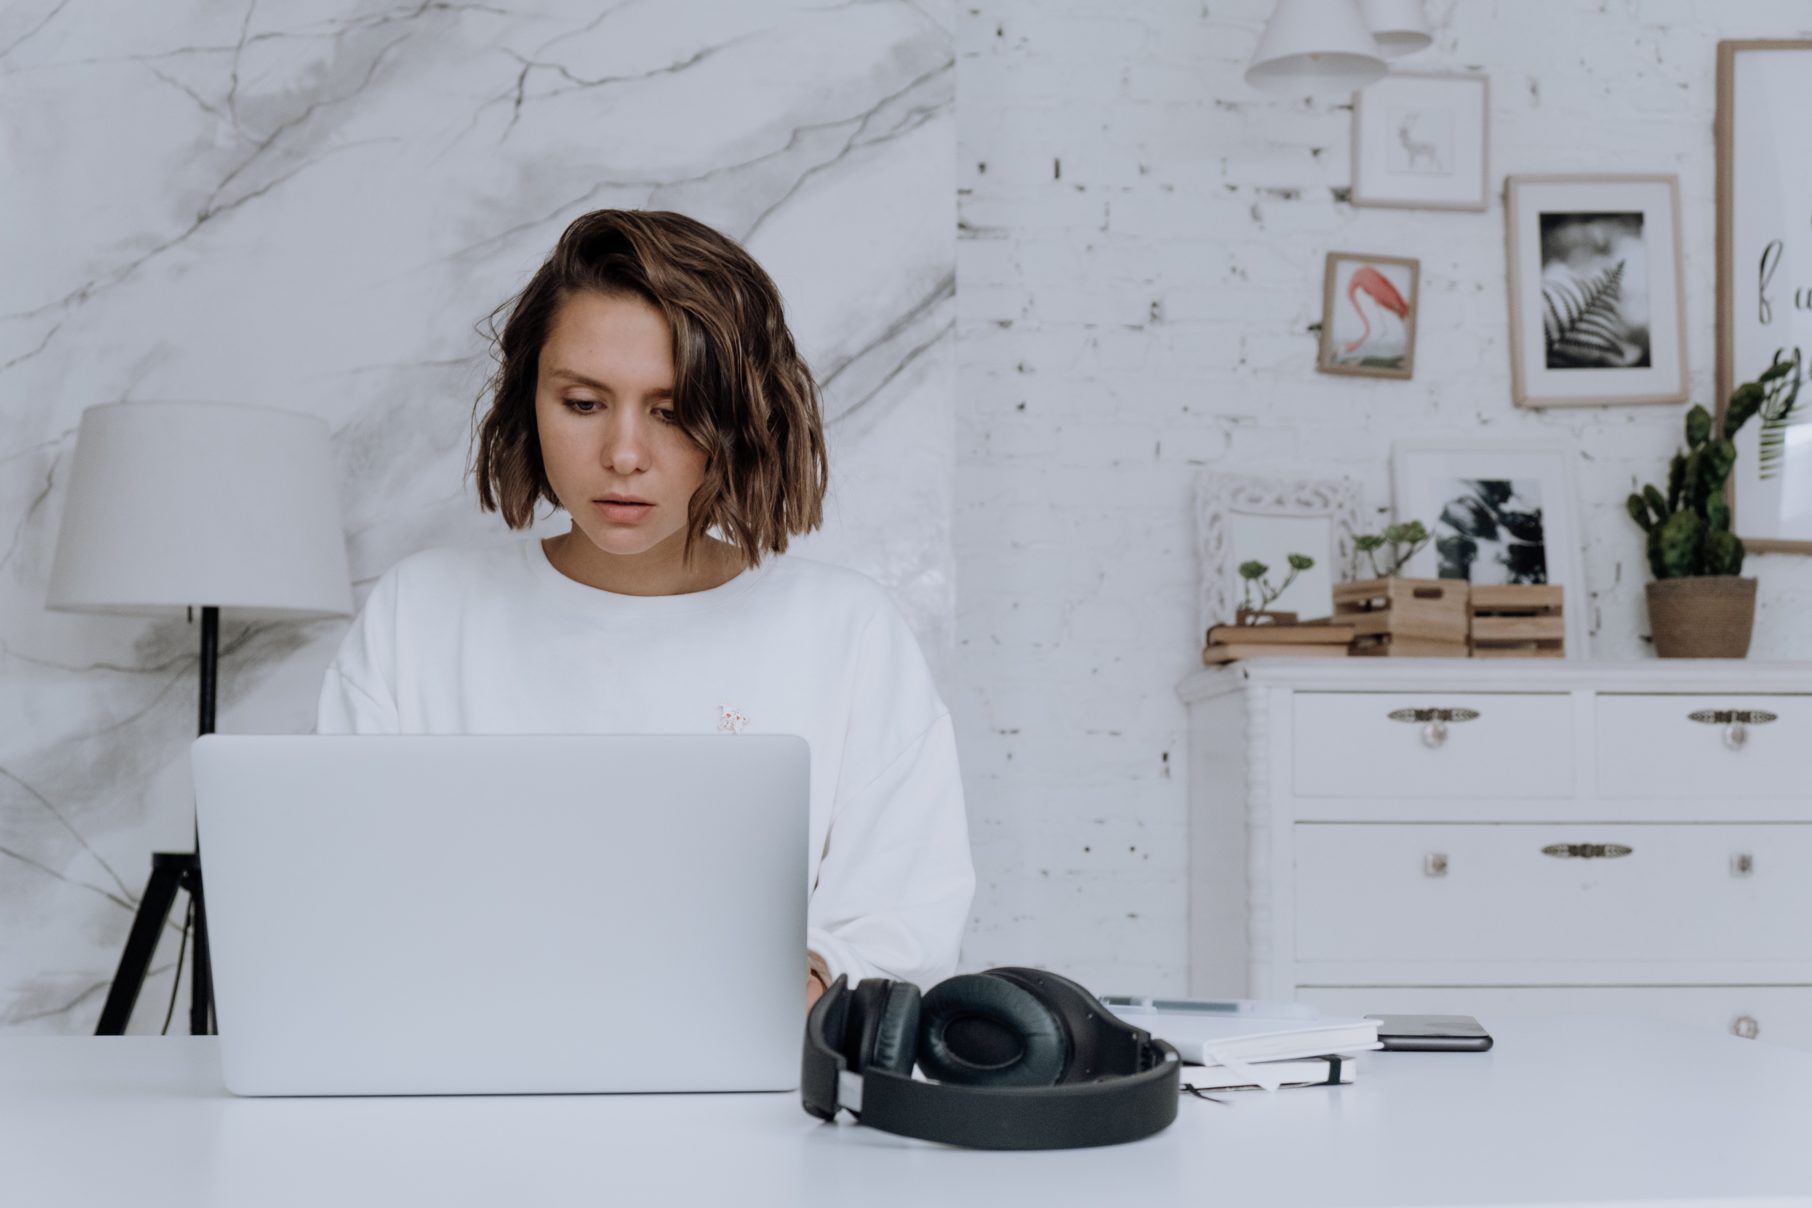 woman in white room using laptop with headphones on desk holiday marketing ideas